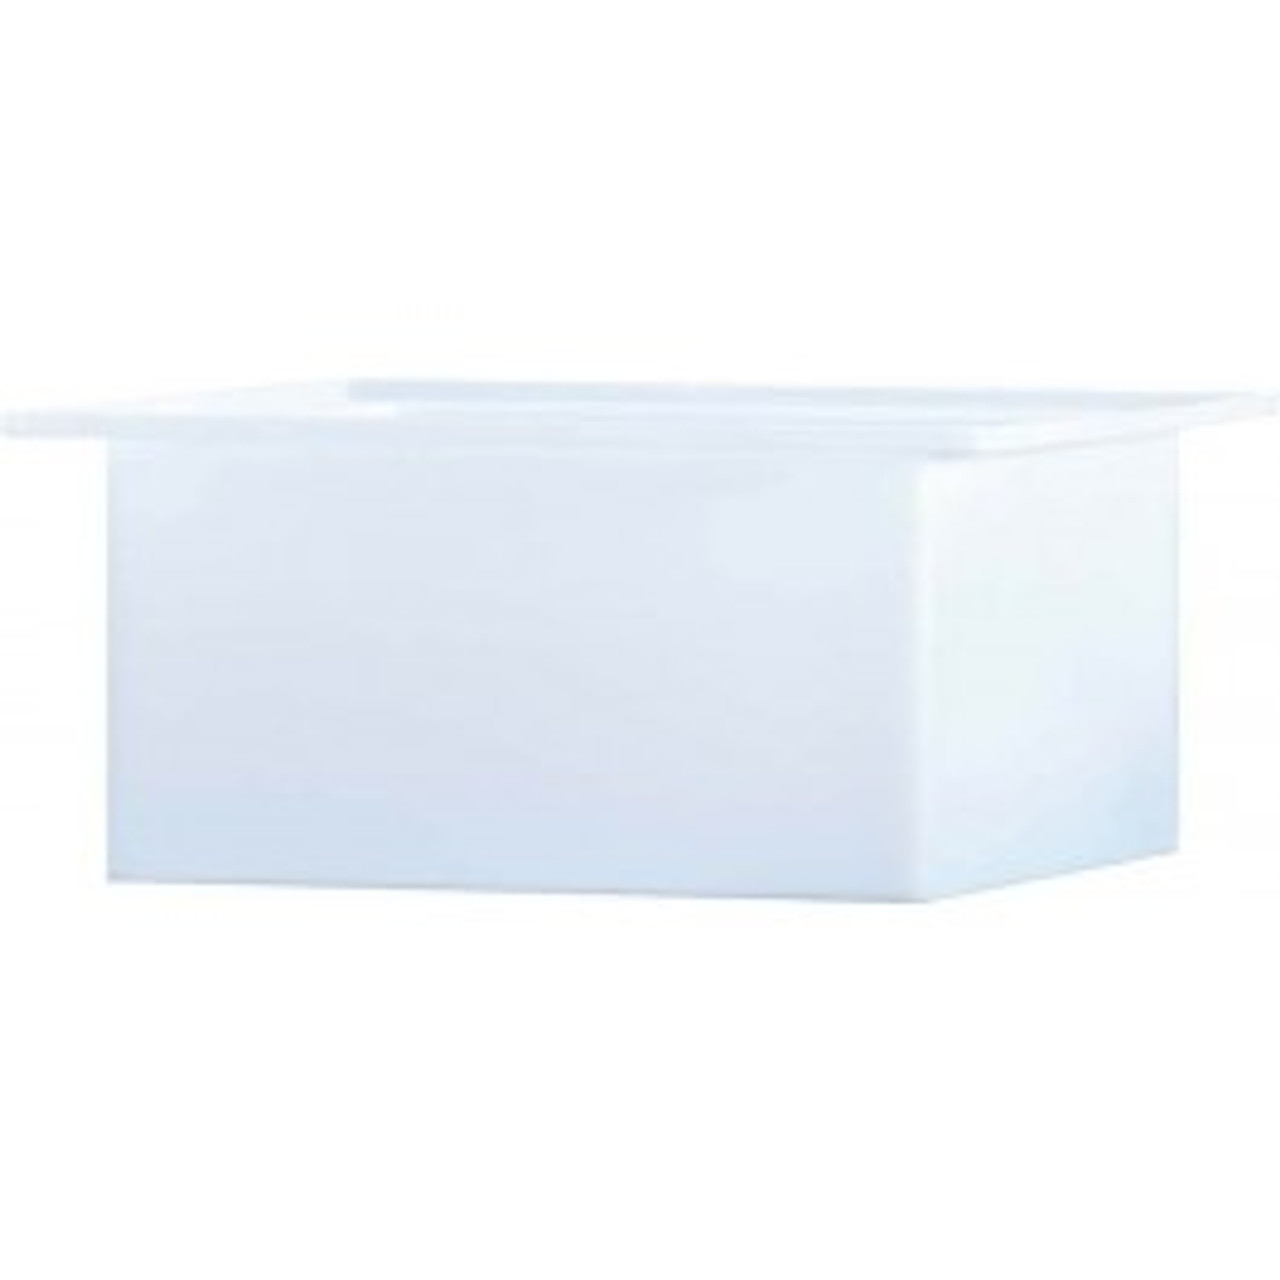 An image of a 67 Gallon PP Chem-Tainer White Rectangular Open Top Tank | R243618B